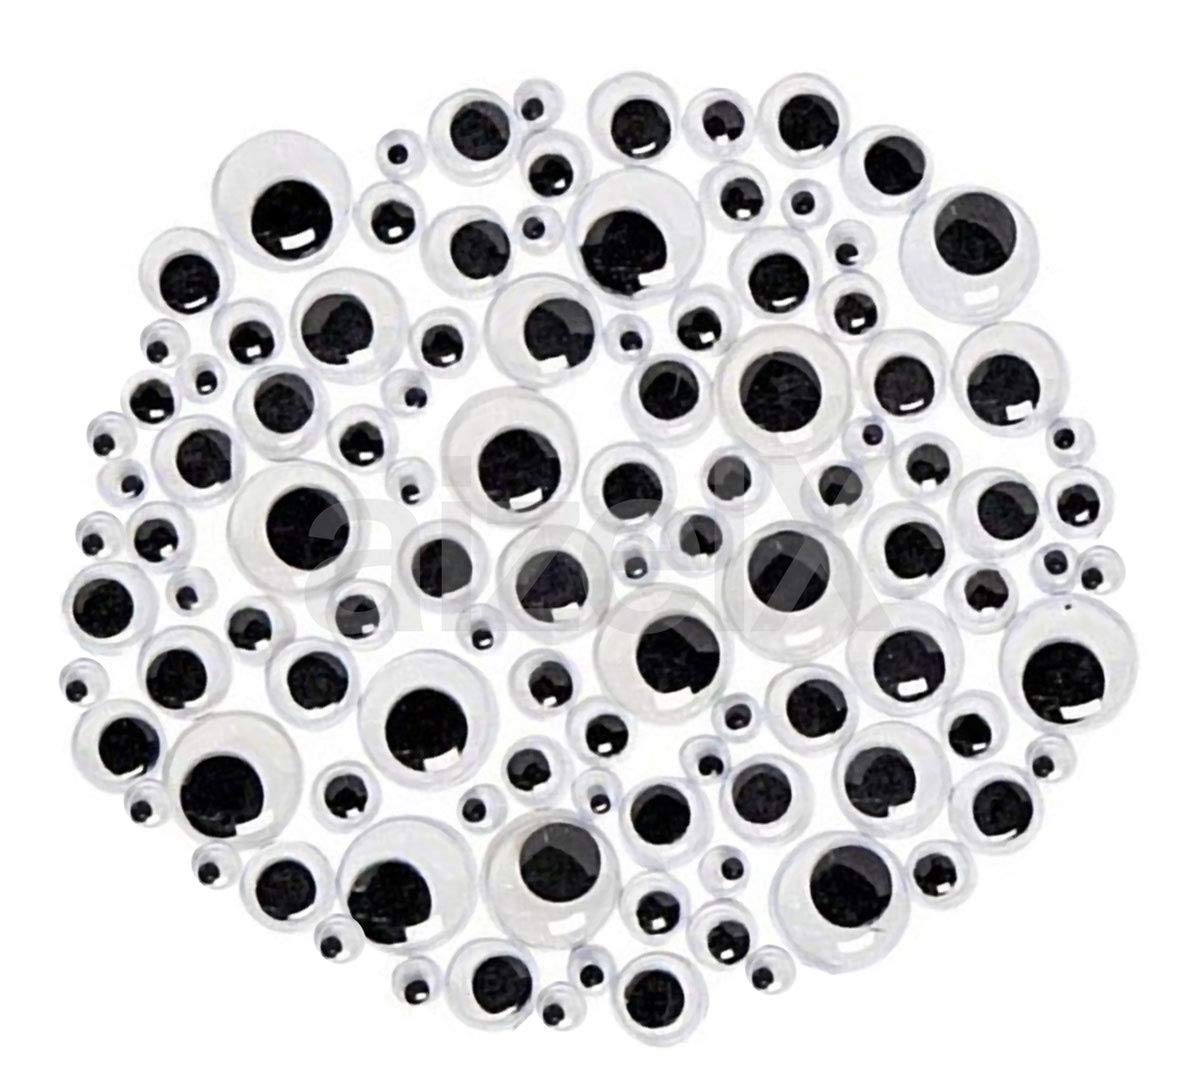 3A Featuretail Googly Eyes/Wiggle Eyes/Doll Eyes for Art and Craft (200  Pieces, 5sizes) – 3A Featuretail – Art & Craft Supplies